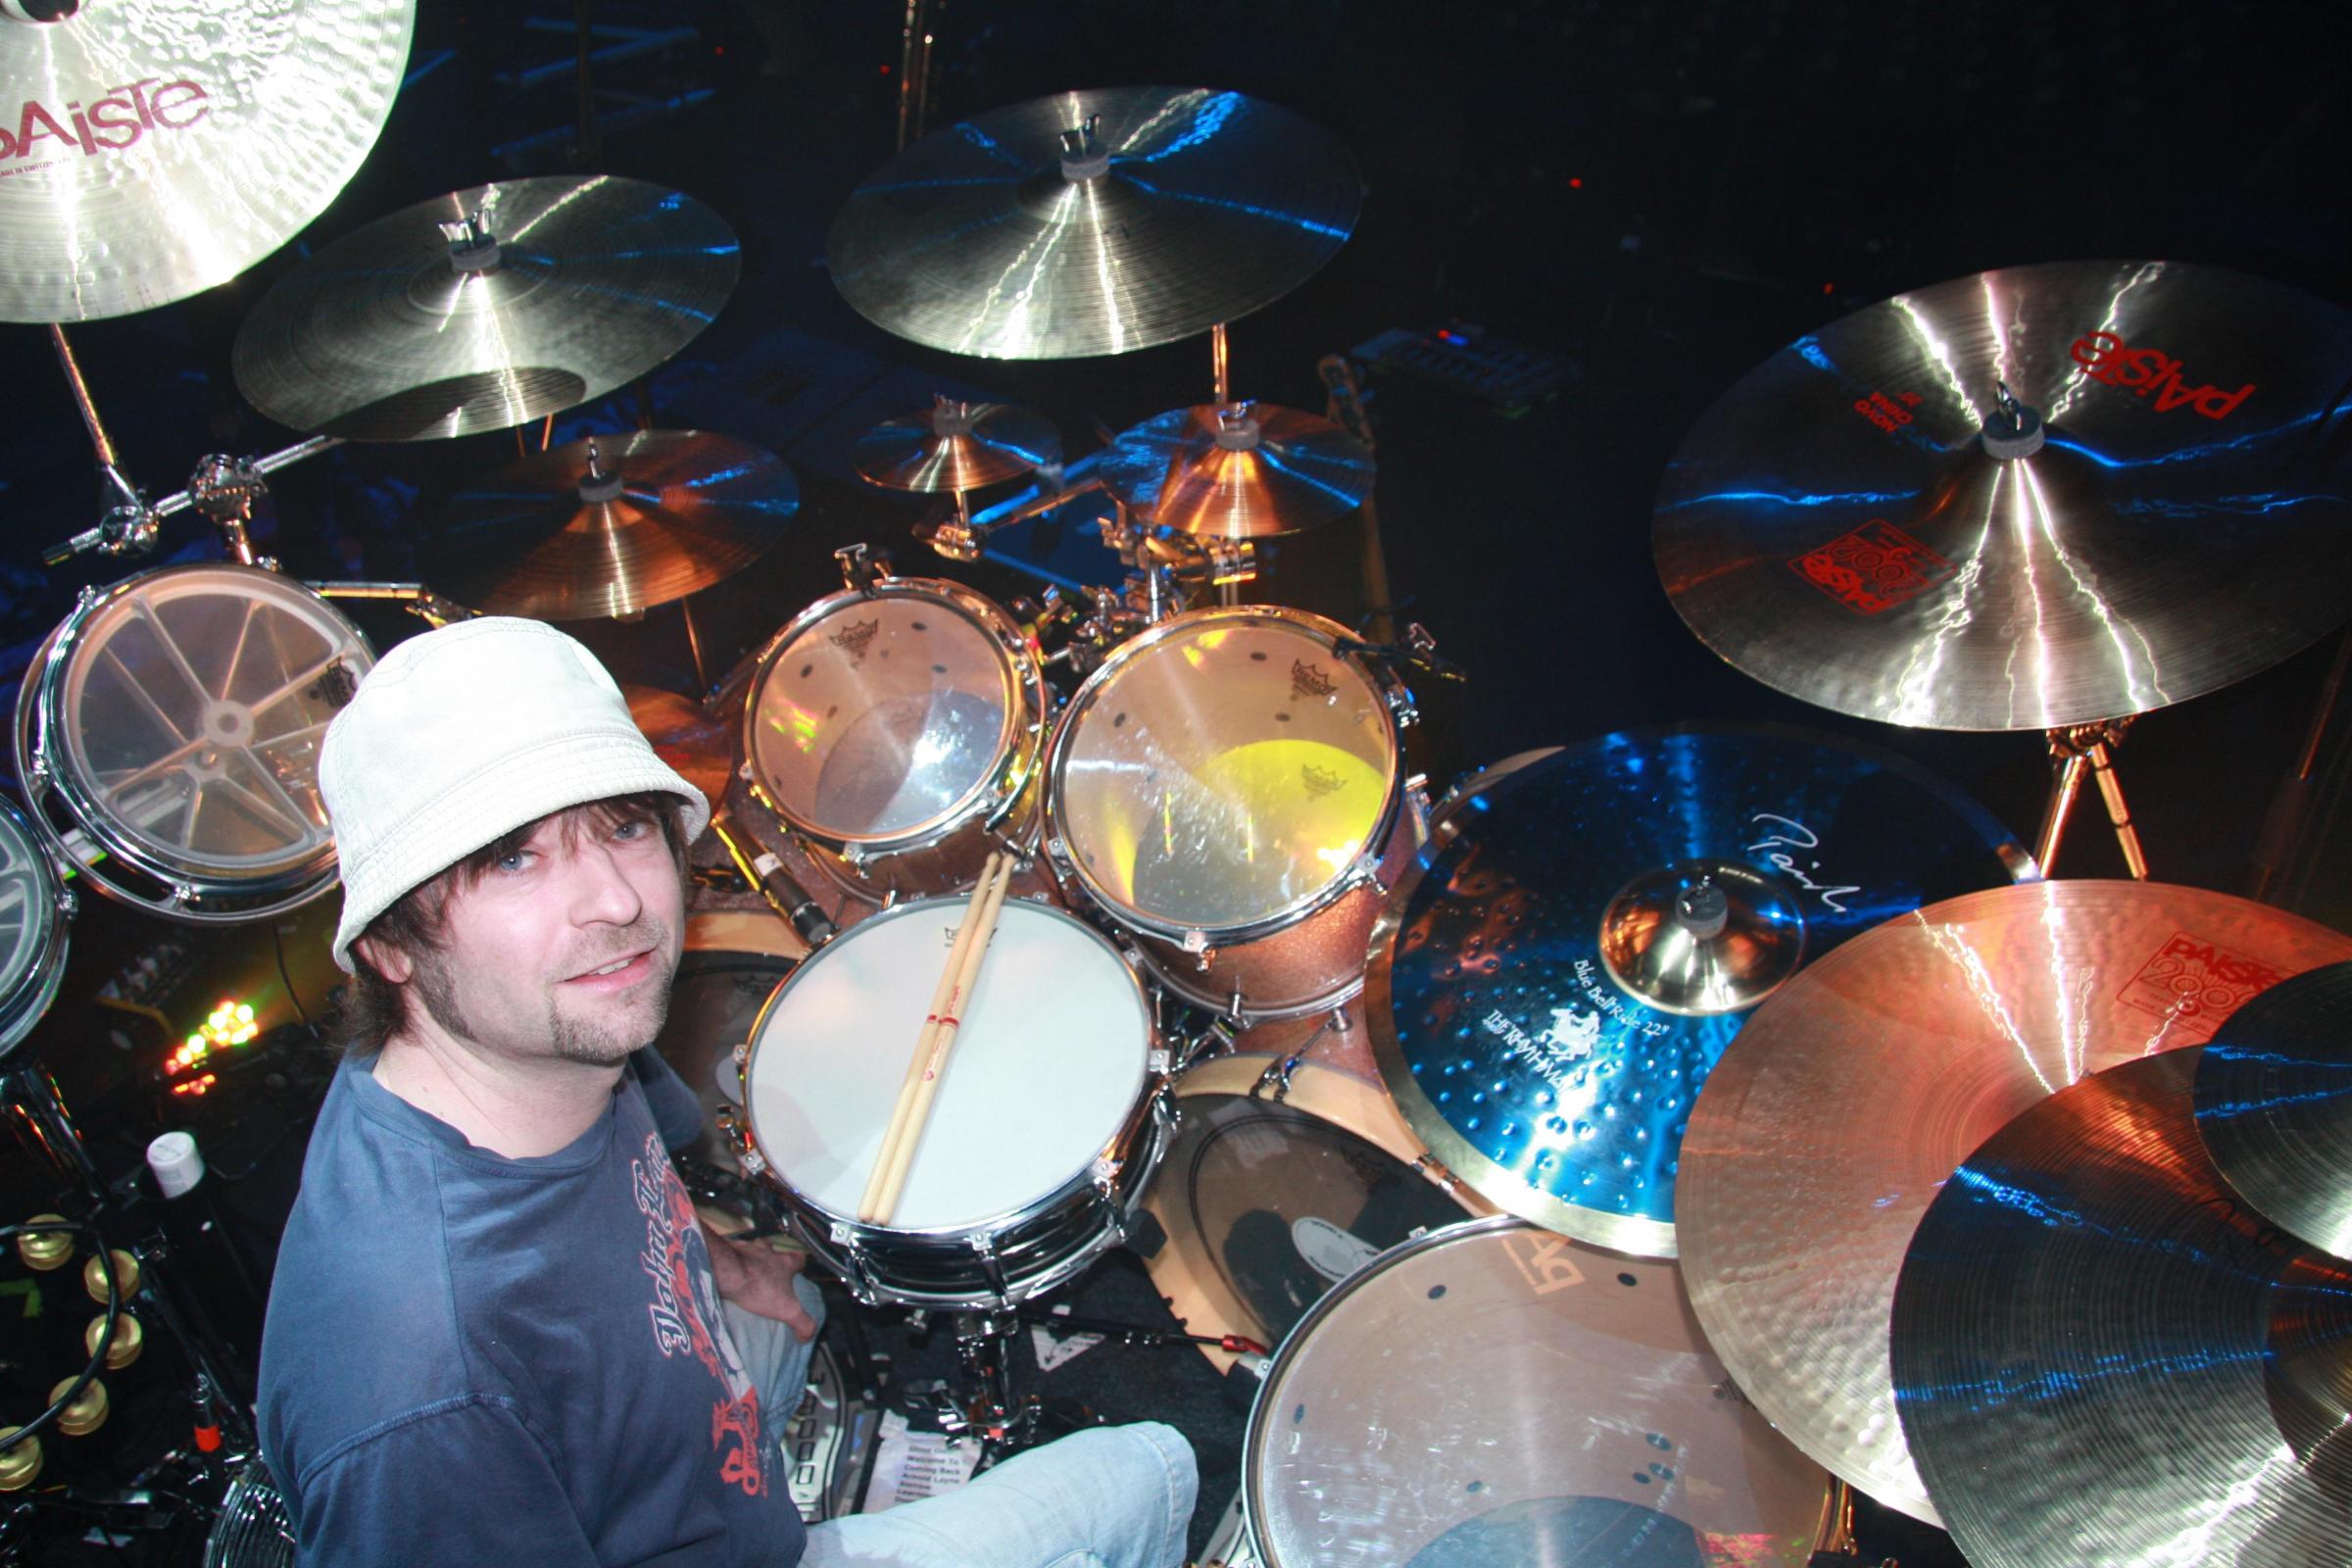 Aussie Pink Floyd drummer Paul Bonney brings home talent to arena gig | The Bolton News